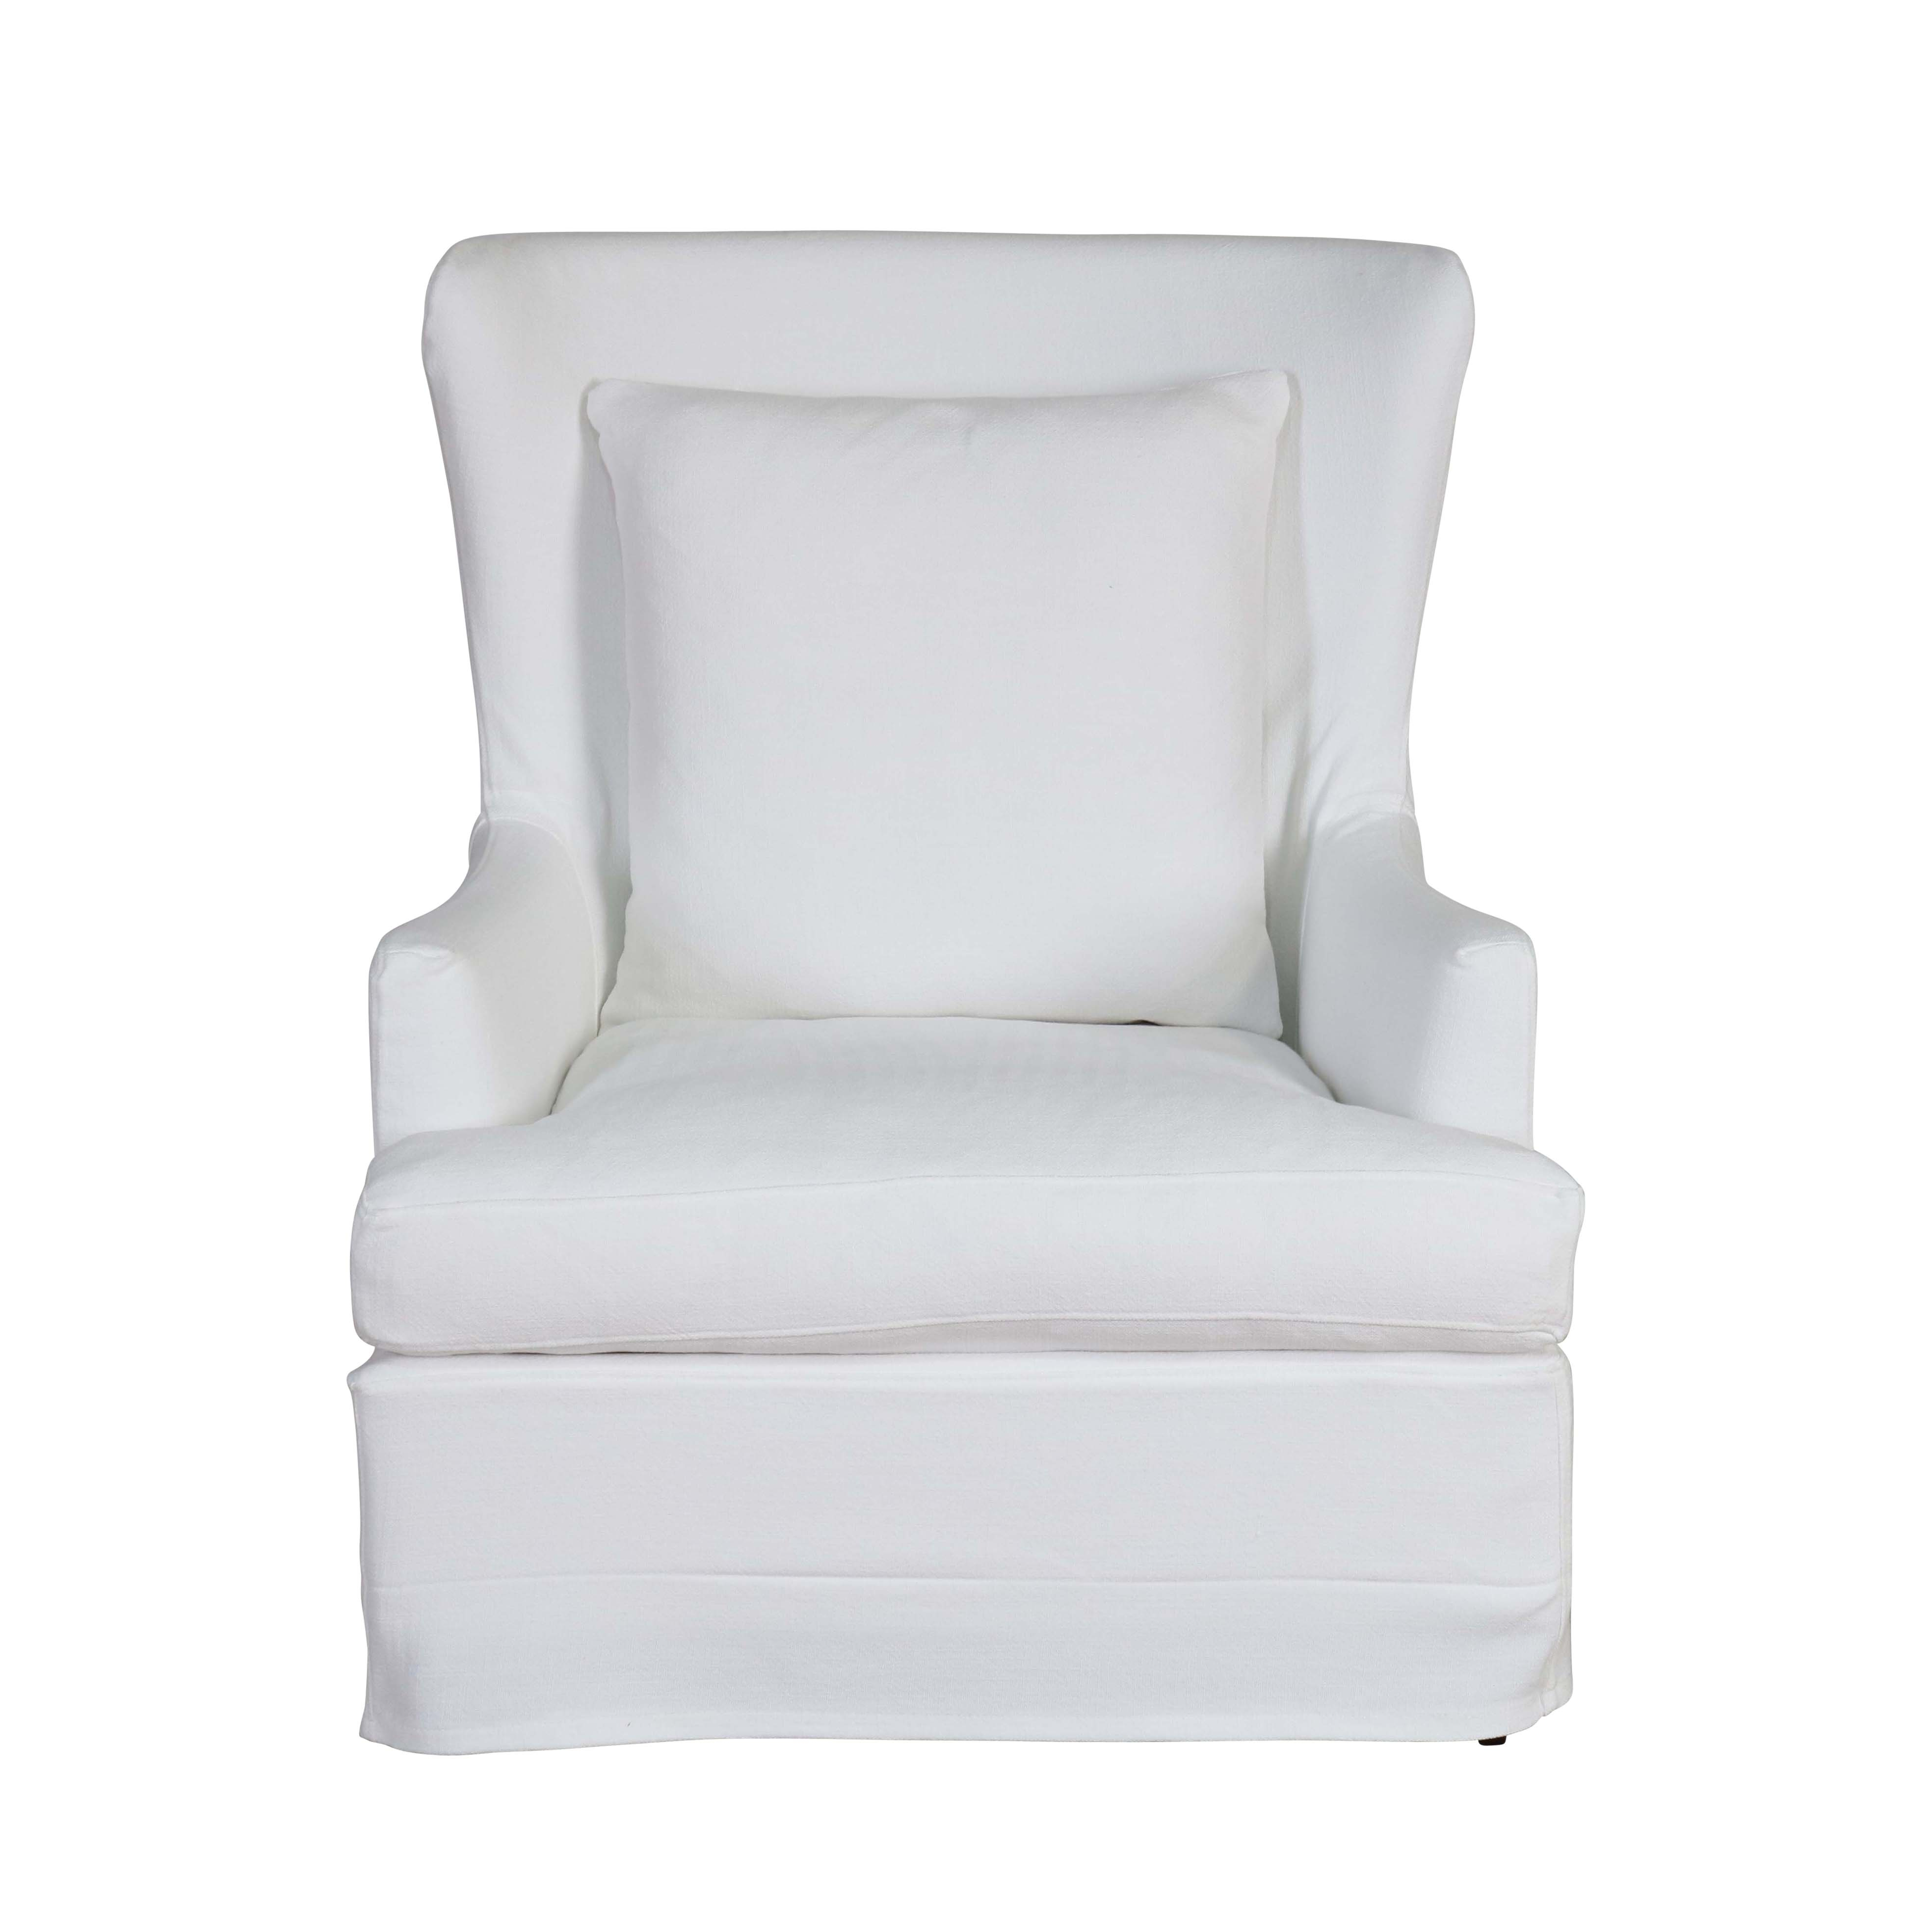 Slipcover wingback armchair in white linen Château collection